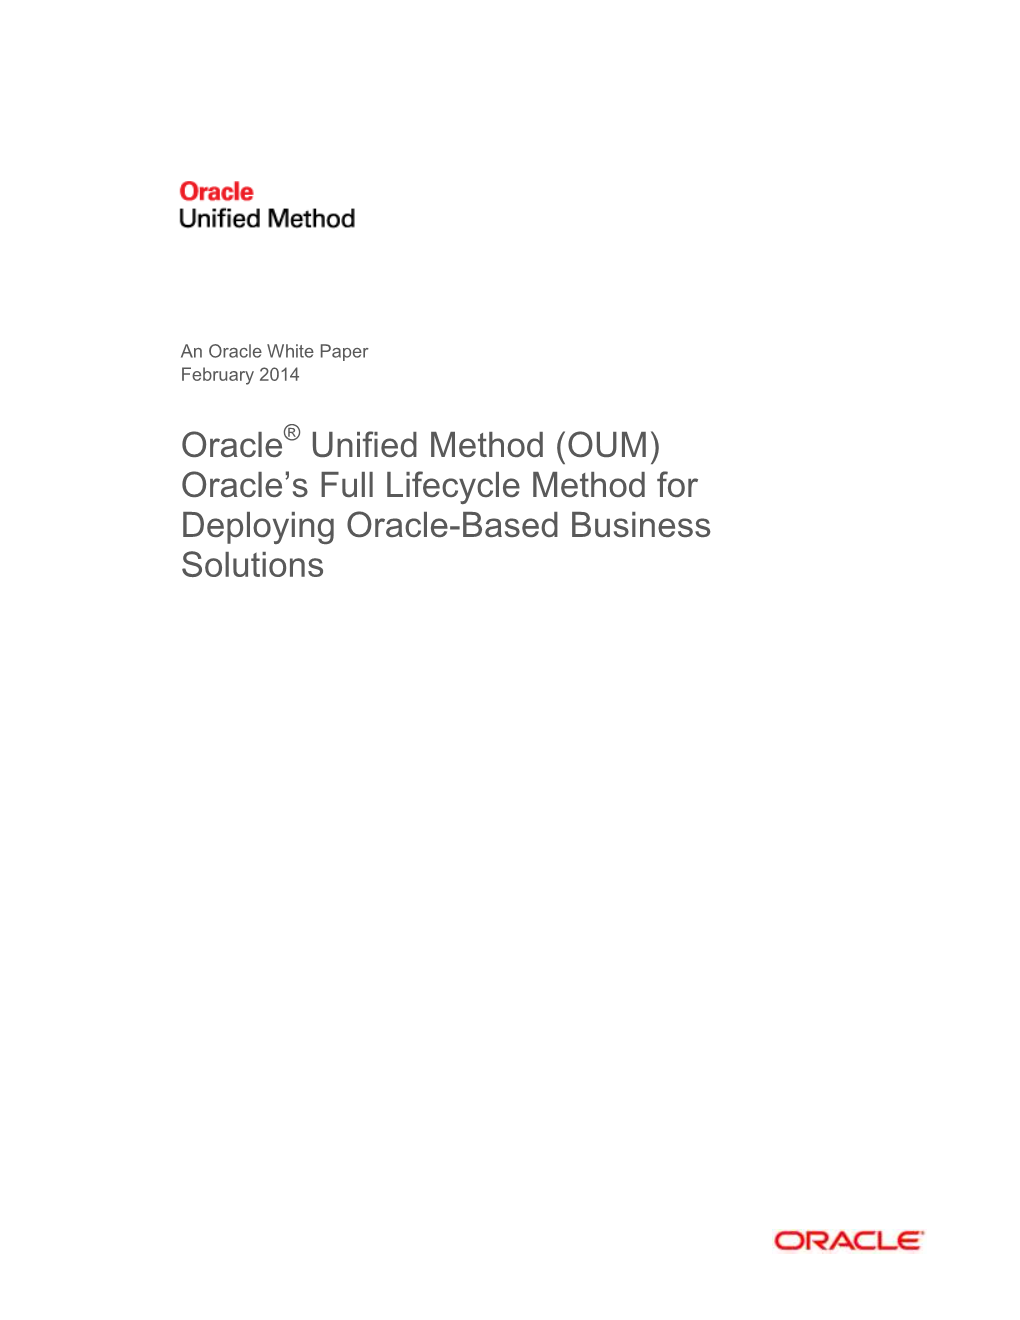 Oracle® Unified Method (OUM) Oracle’S Full Lifecycle Method for Deploying Oracle-Based Business Solutions